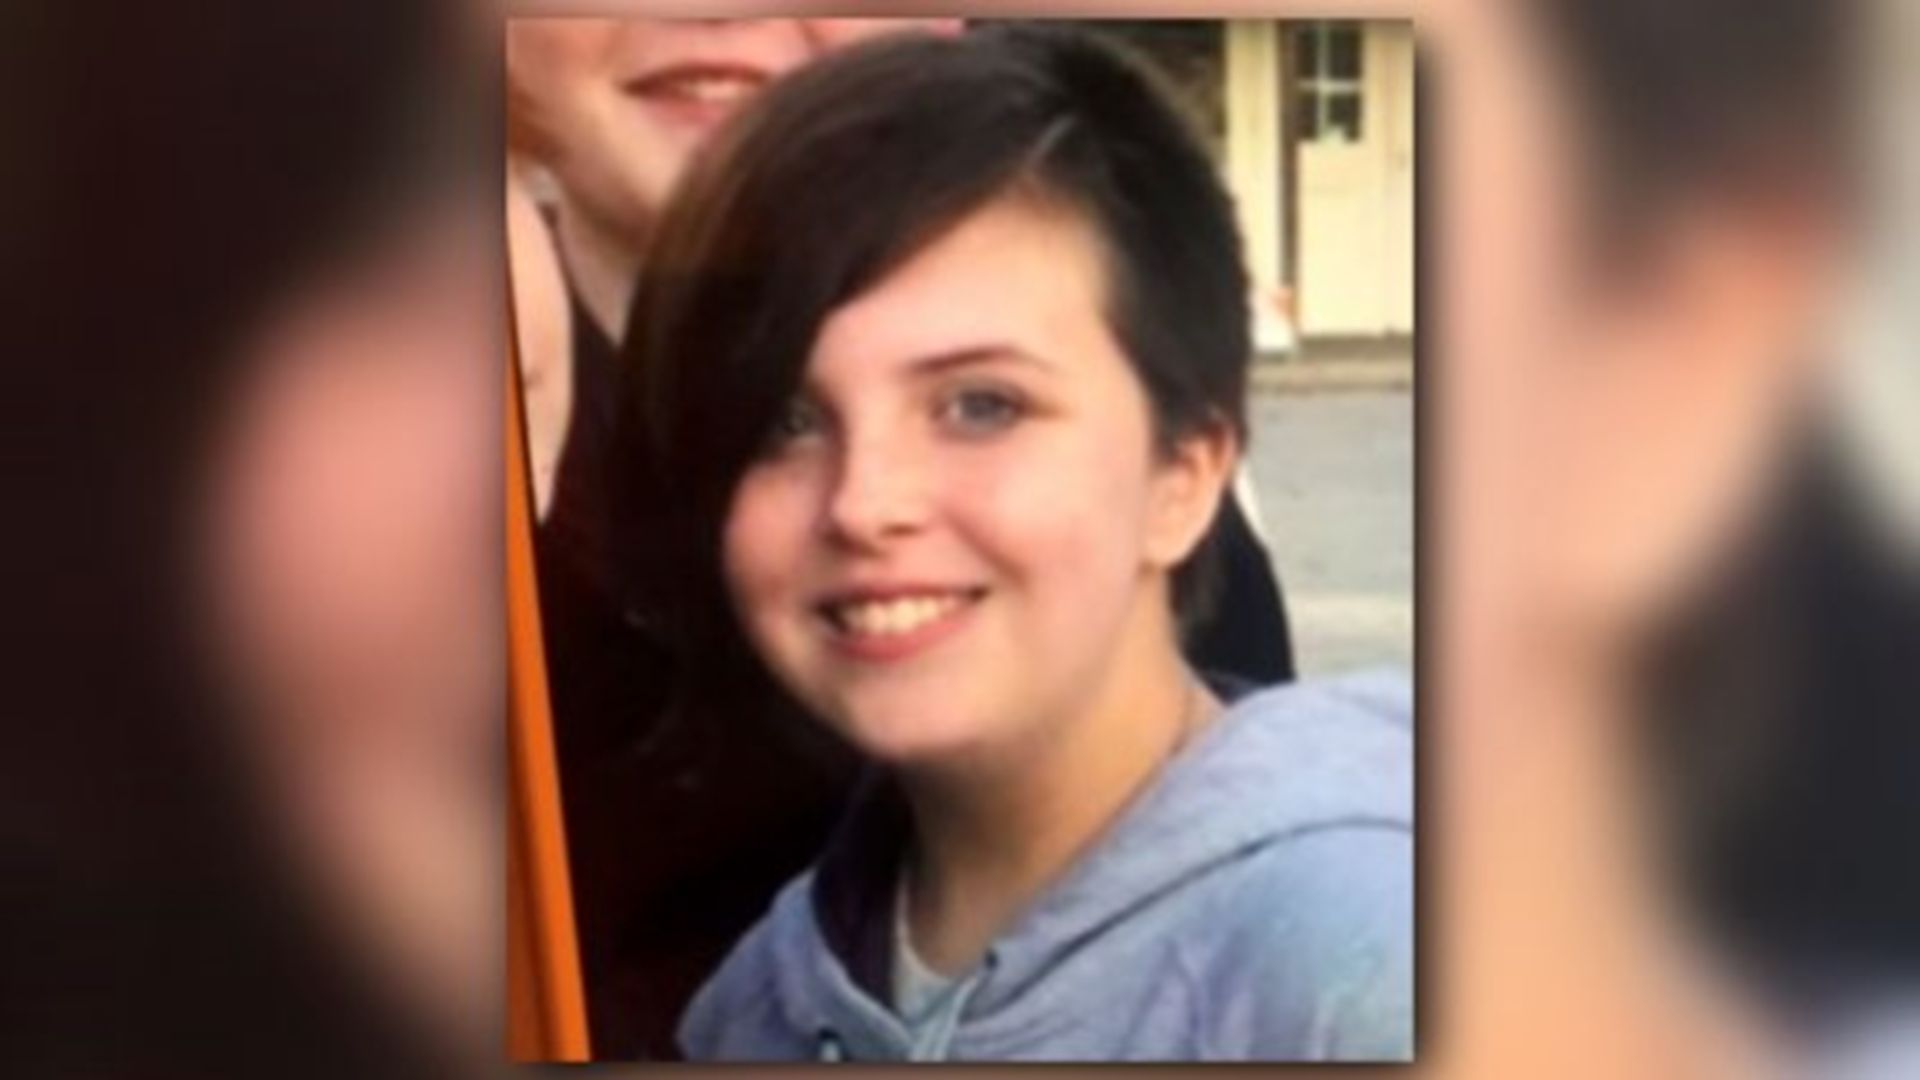 The Springdale Police Department shared a Facebook post asking for help in searching for a runaway female.